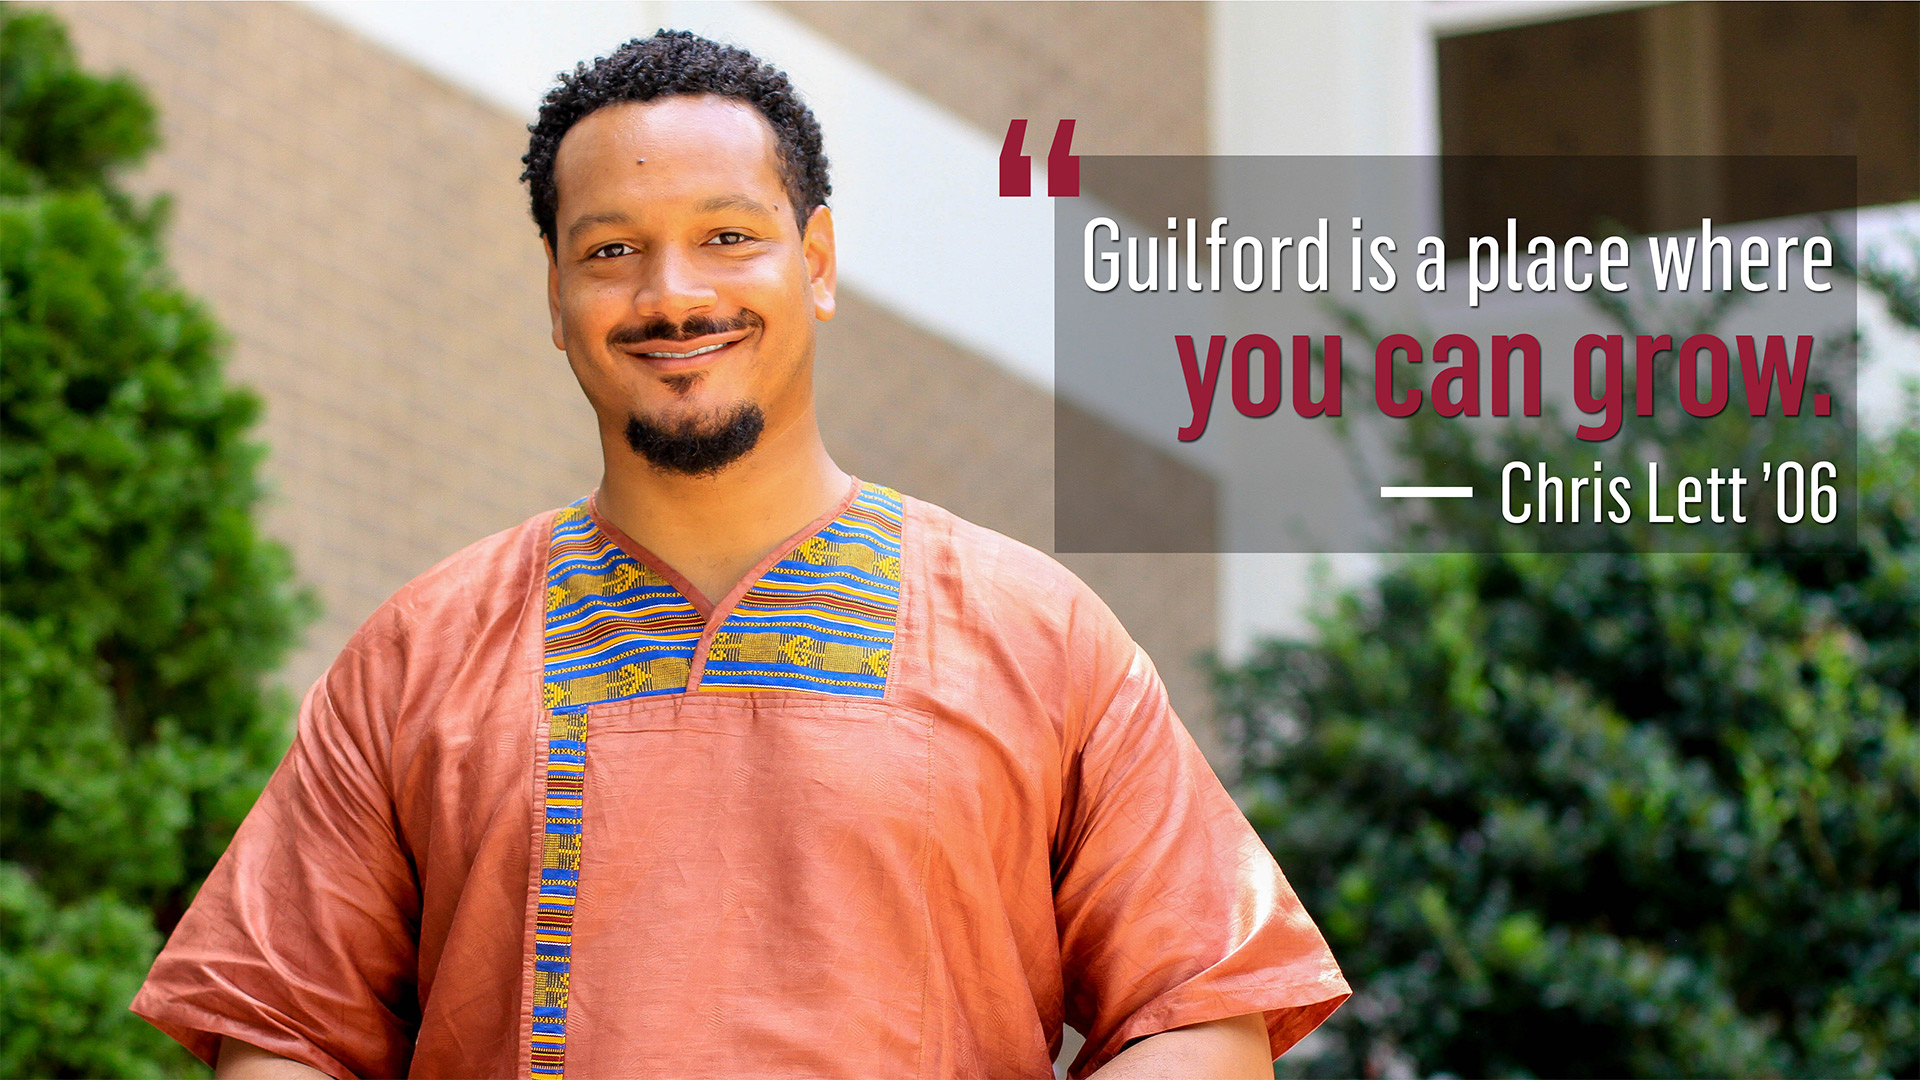 Guilford alumni Chris Lett in a photo with the quote, "Guilford is a place where you can grow."